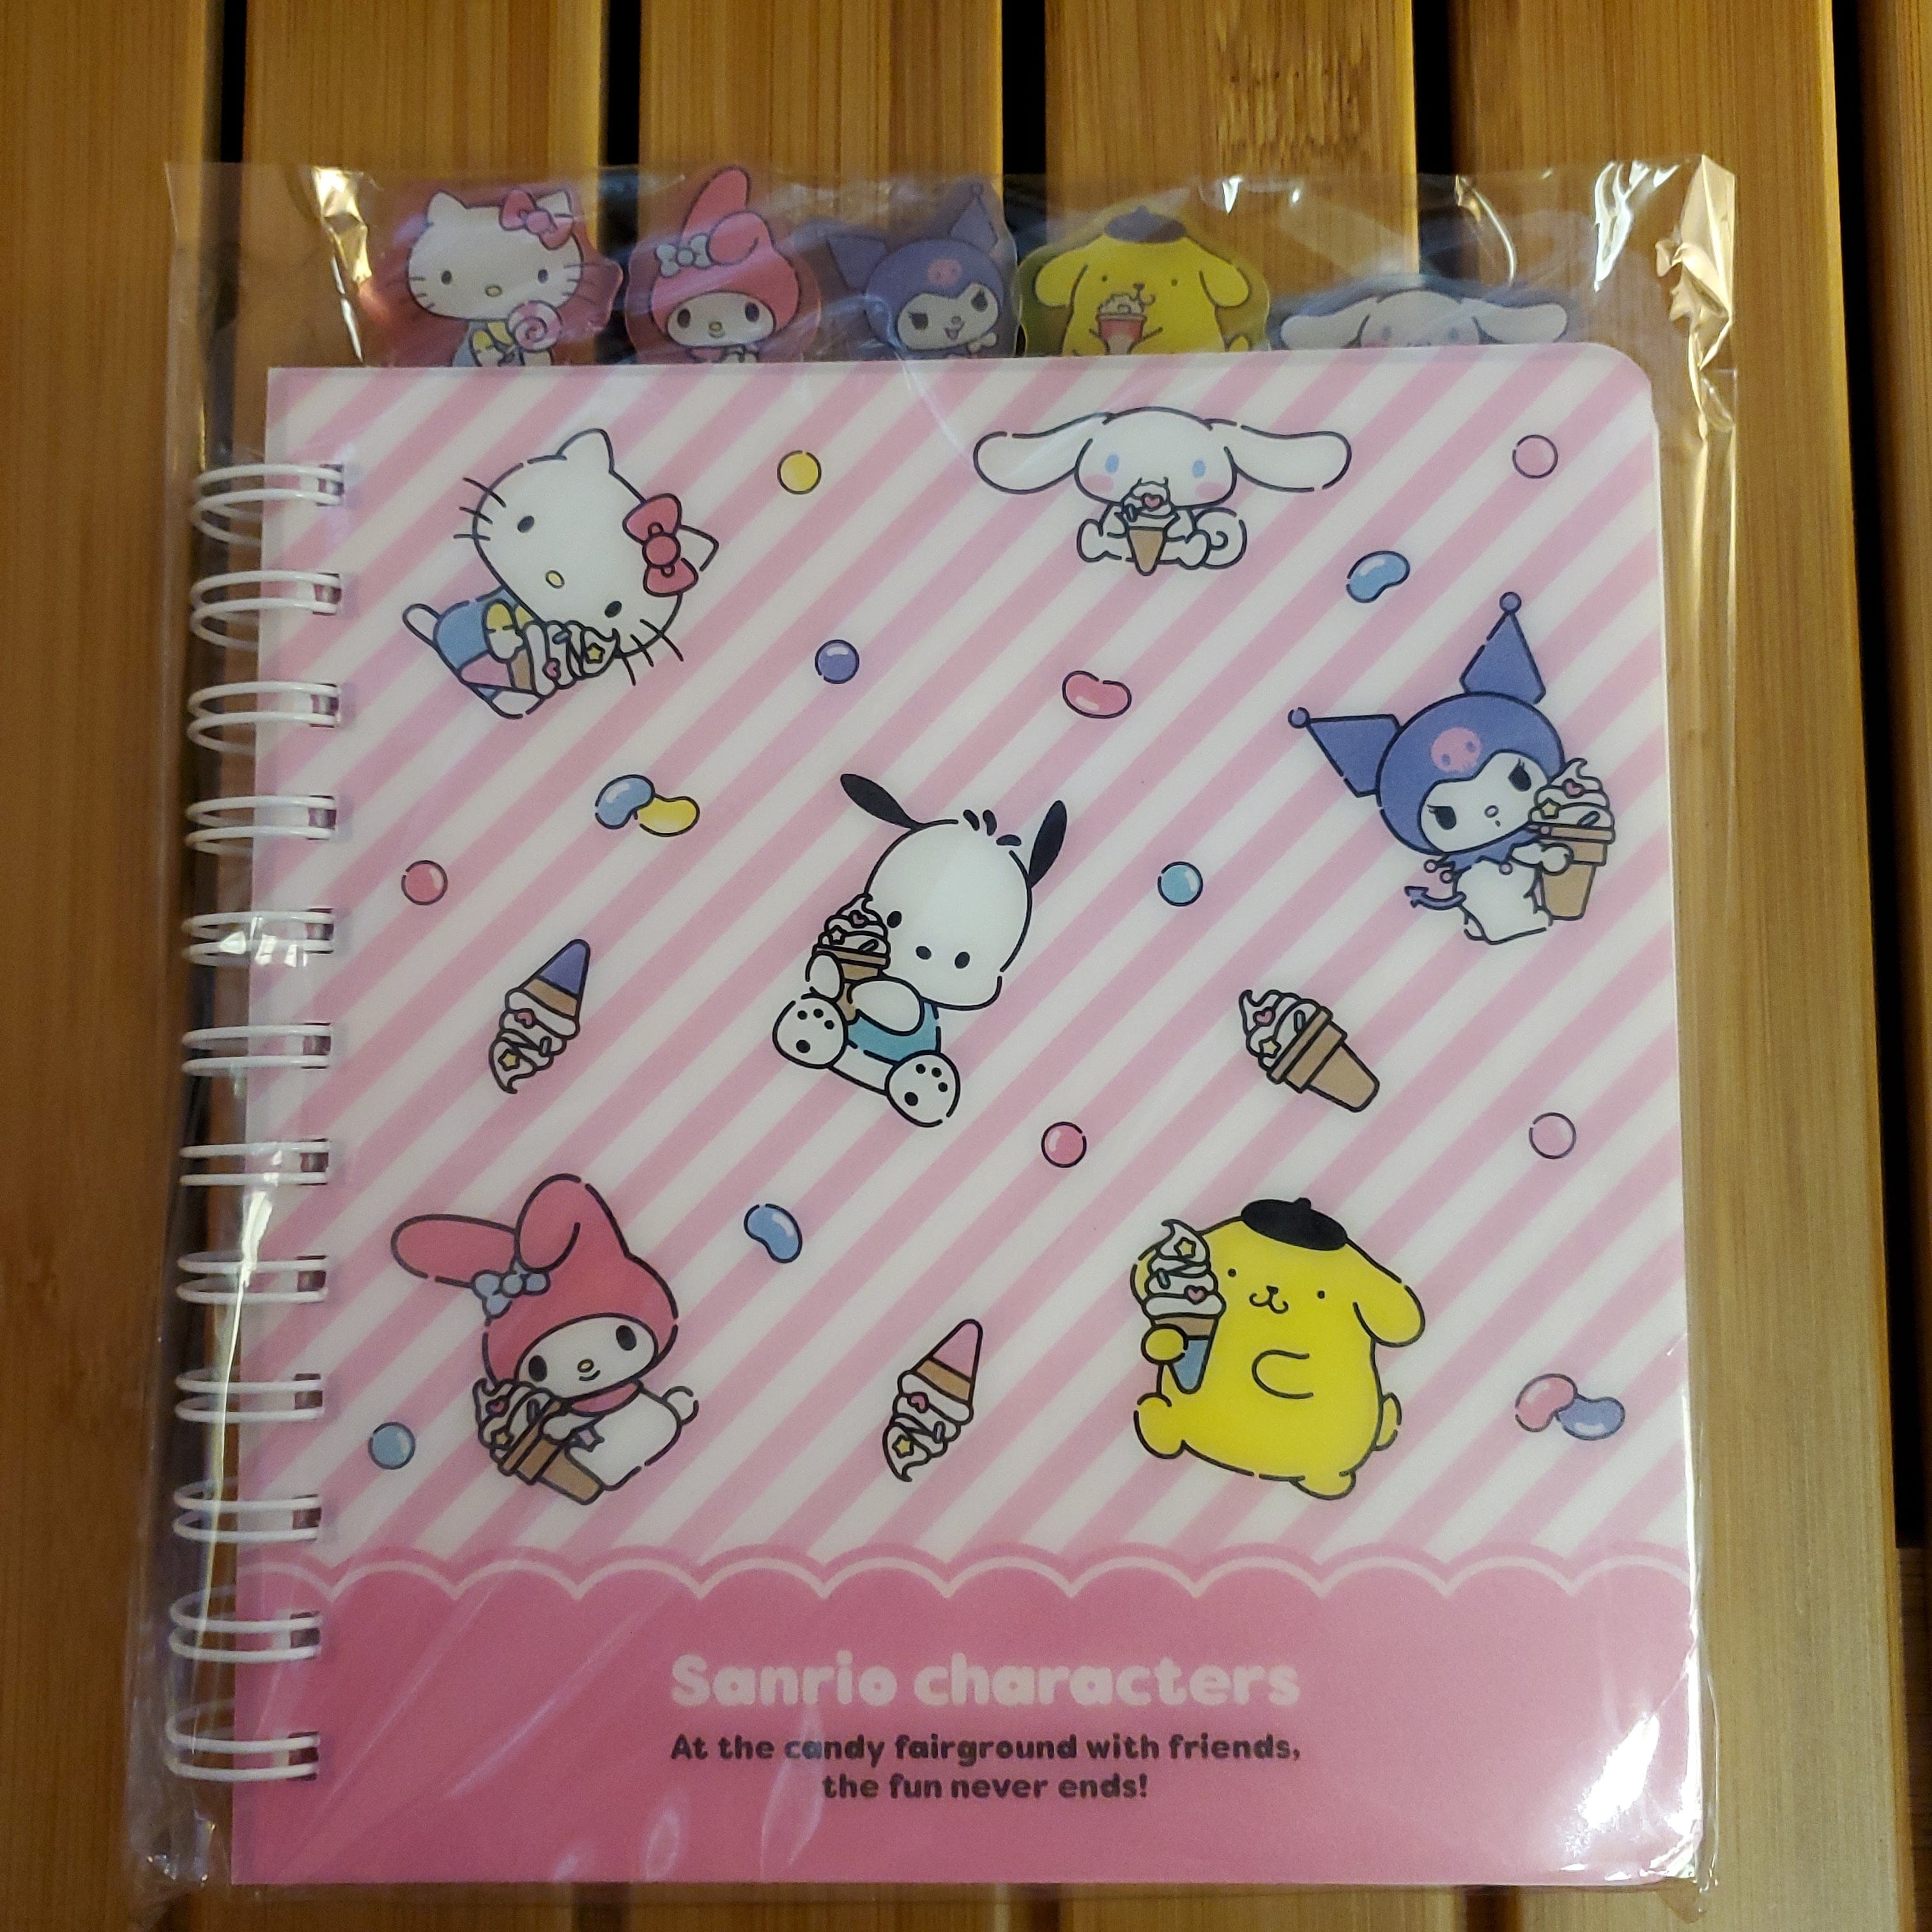 Spiral Bound Productivity Notebook Bundle - Hello Kitty 80 Lined Pages,  200+ Stickers and 4pk Crayons - Great for School and Travel - Cover Varies